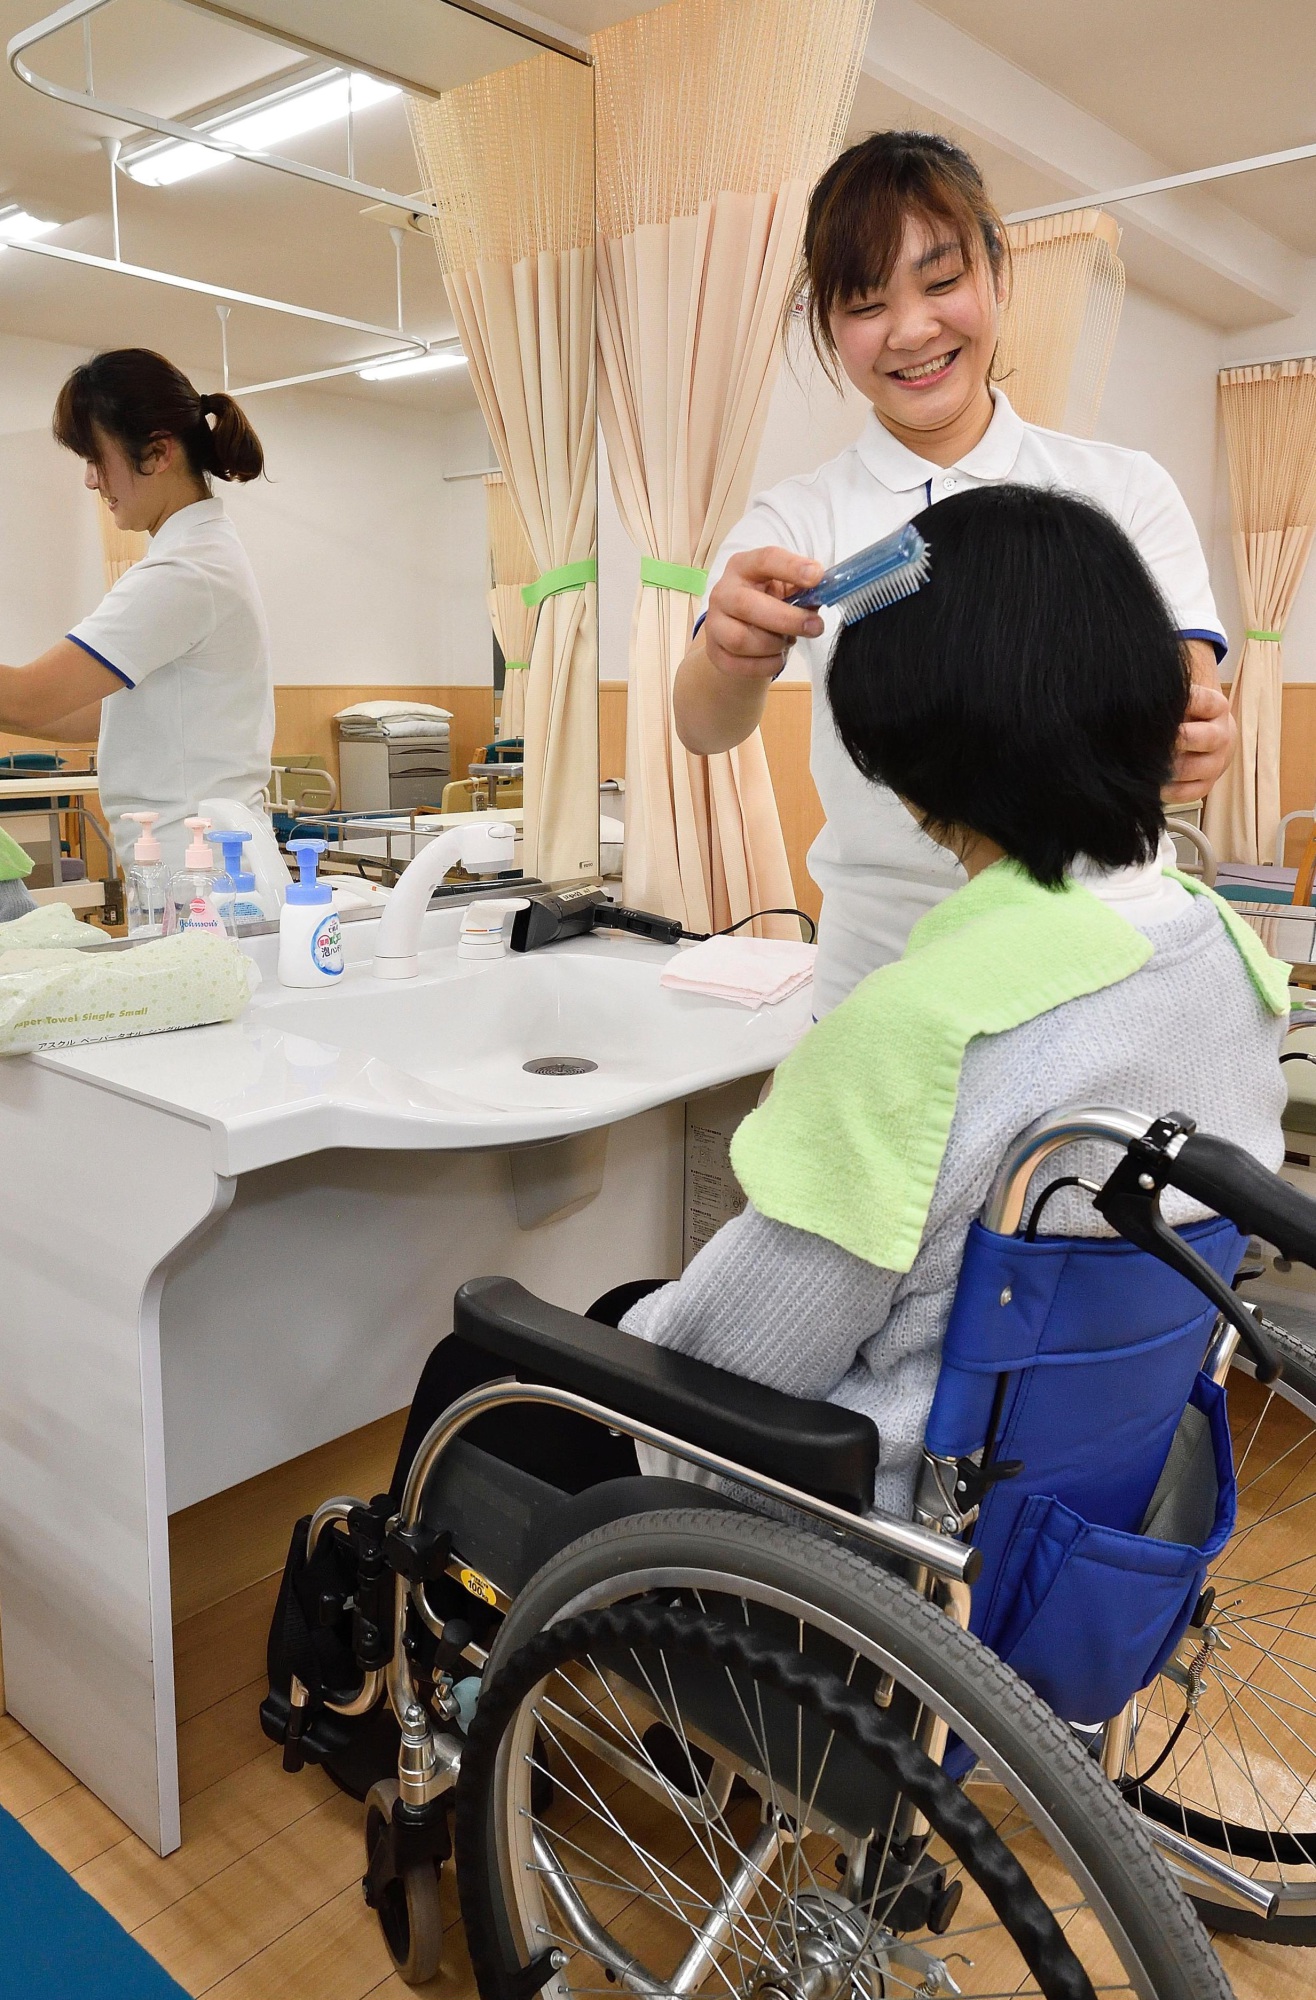 Japan sees sharp rise in number of foreign nursing care students | The